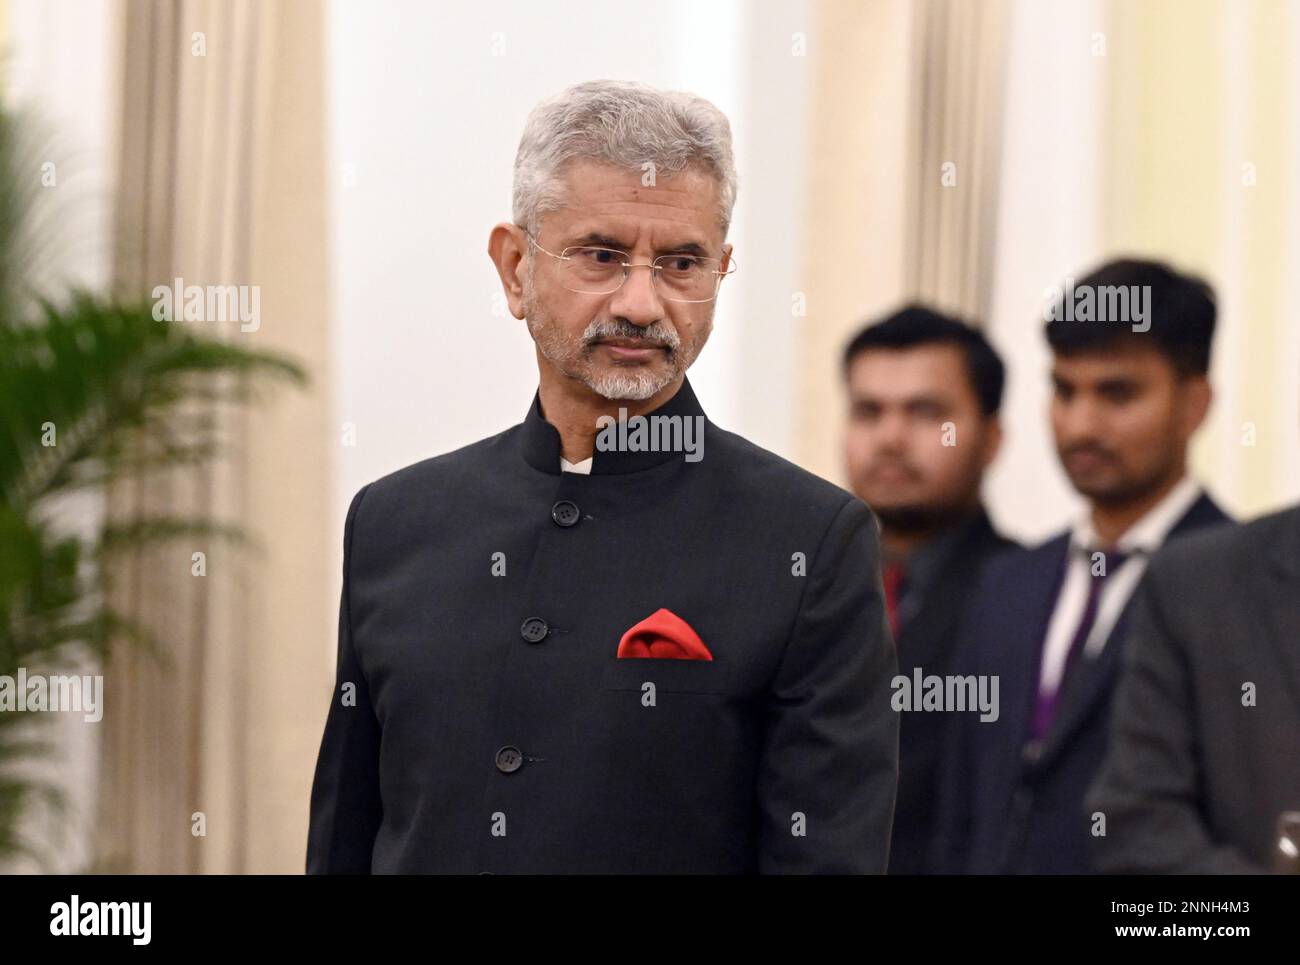 NEW DELHI, INDIA - FEBRUARY 25: Minister of External Affairs S.Jaishankar during the joint press statement at the Hyderabad House, on February 25, 2023 in New Delhi, India. Olaf Scholz arrived today in New Delhi for two-day visit, accompanied by senior officials and a high-powered business delegation. Olaf Scholz said that India has undertaken an enormous leap which is very good for the relations between the two countries. Scholz said that he and Prime Minister Narendra Modi were committed to making a free trade deal between India and the European Union finally happen. (Photo by Sanjeev Verma/ Stock Photo